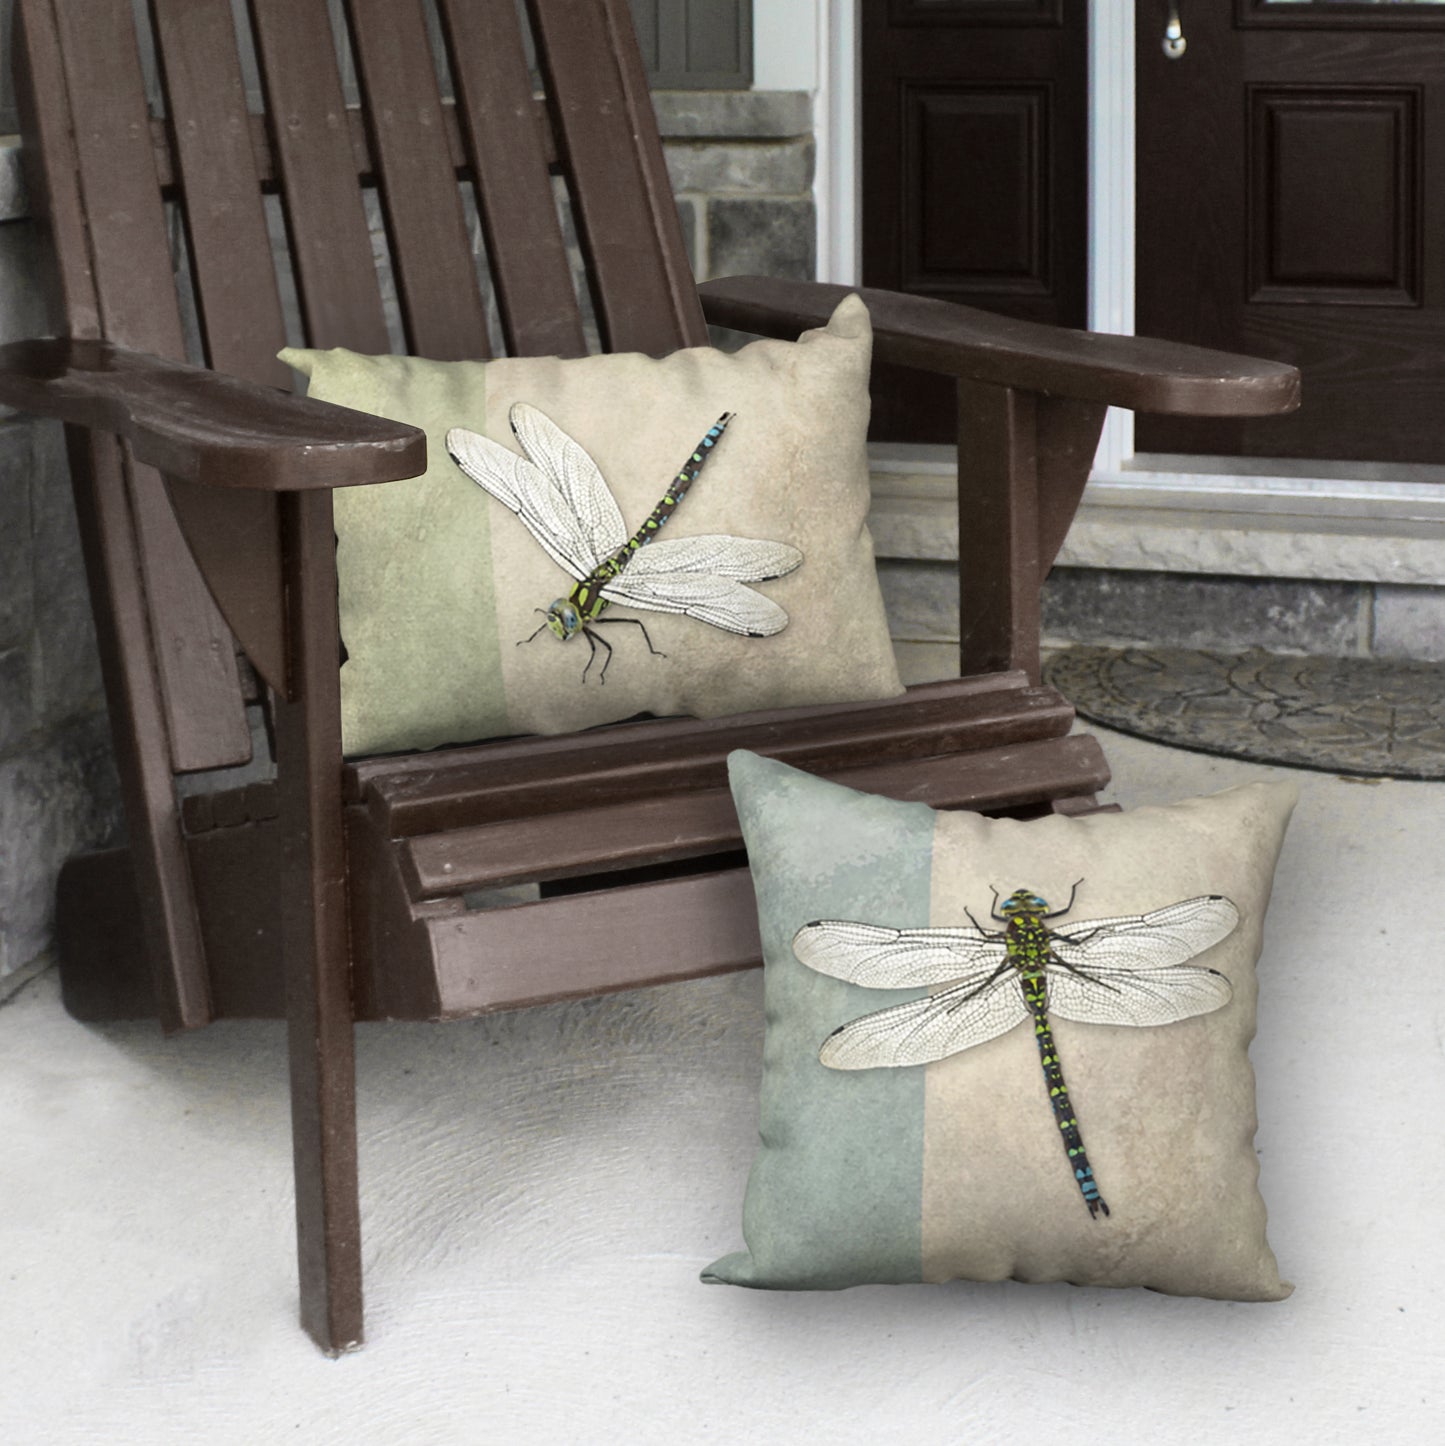 Set of 2 Dragonfly Designer Pillows, 18"x18" and 20"x14"